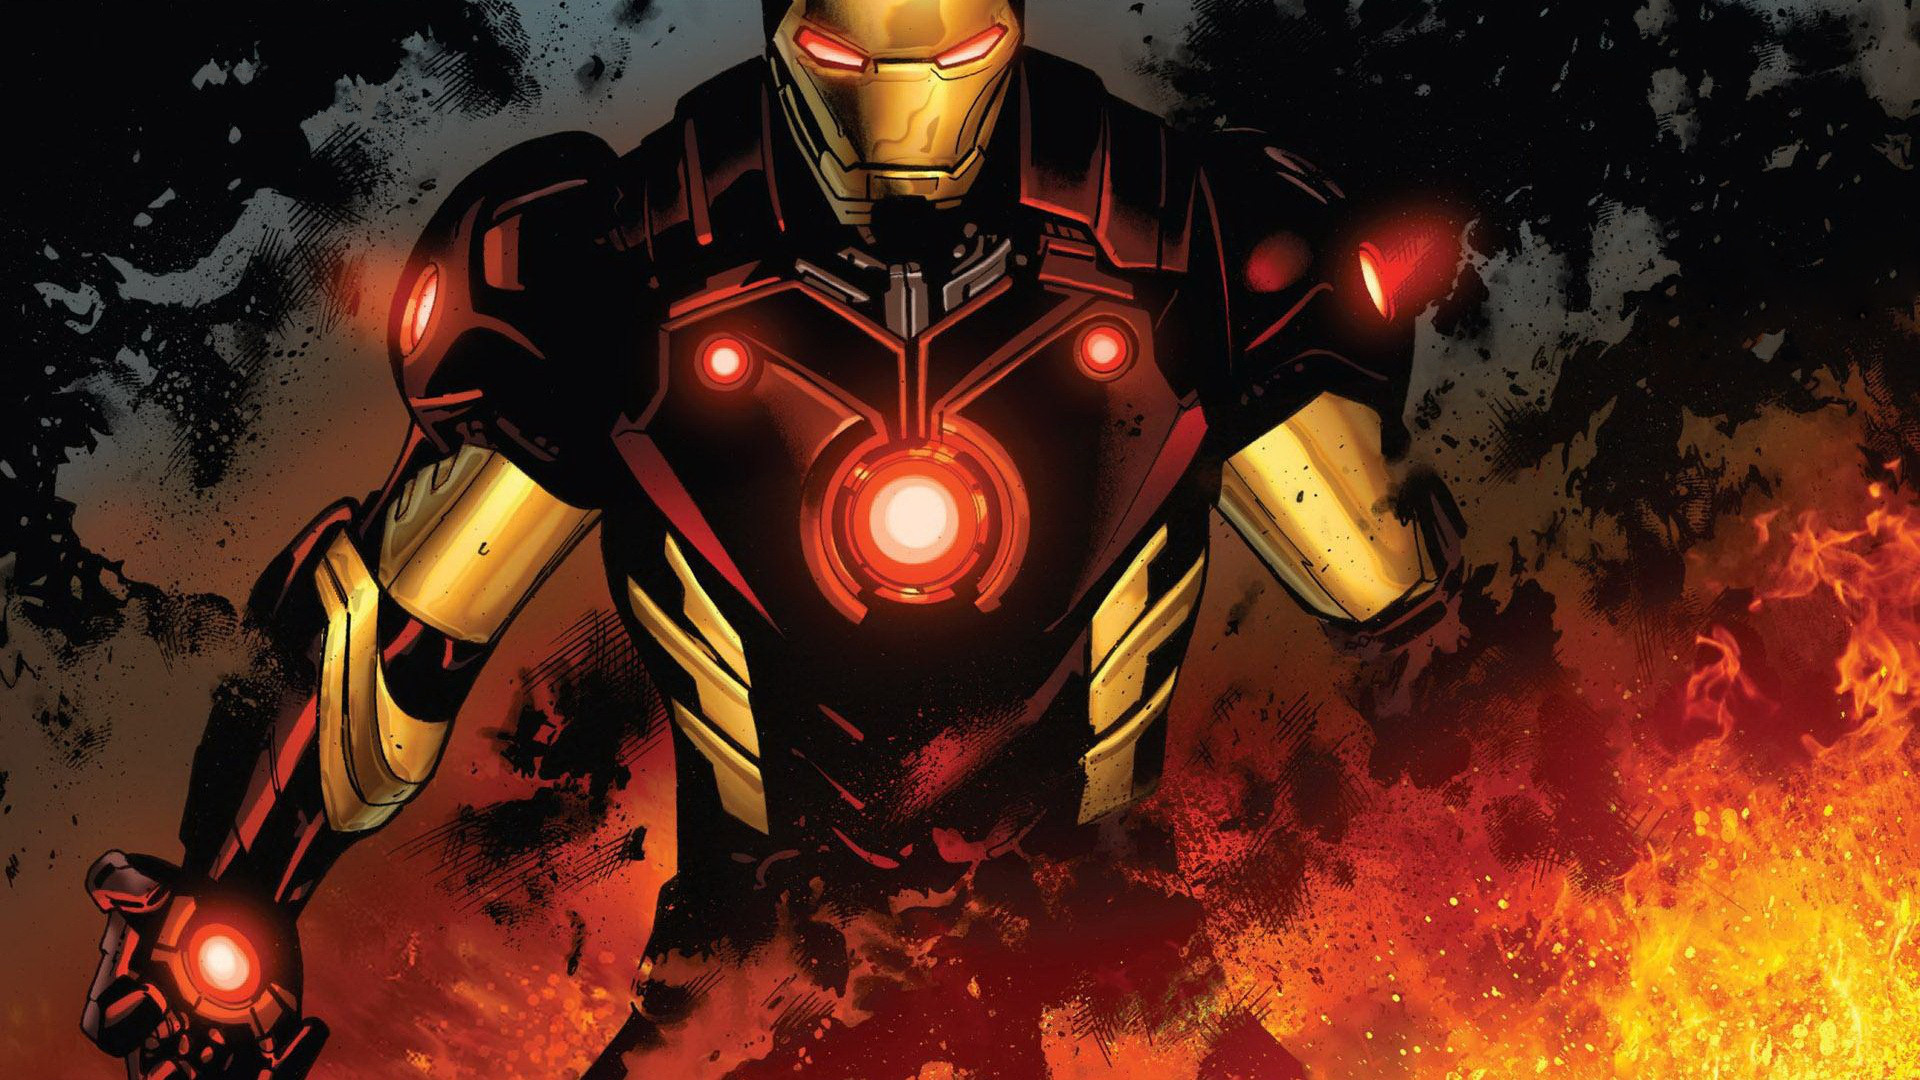 1920x1080 ... Collection of Iron Man Wallpaper Hd on Spyder Wallpapers